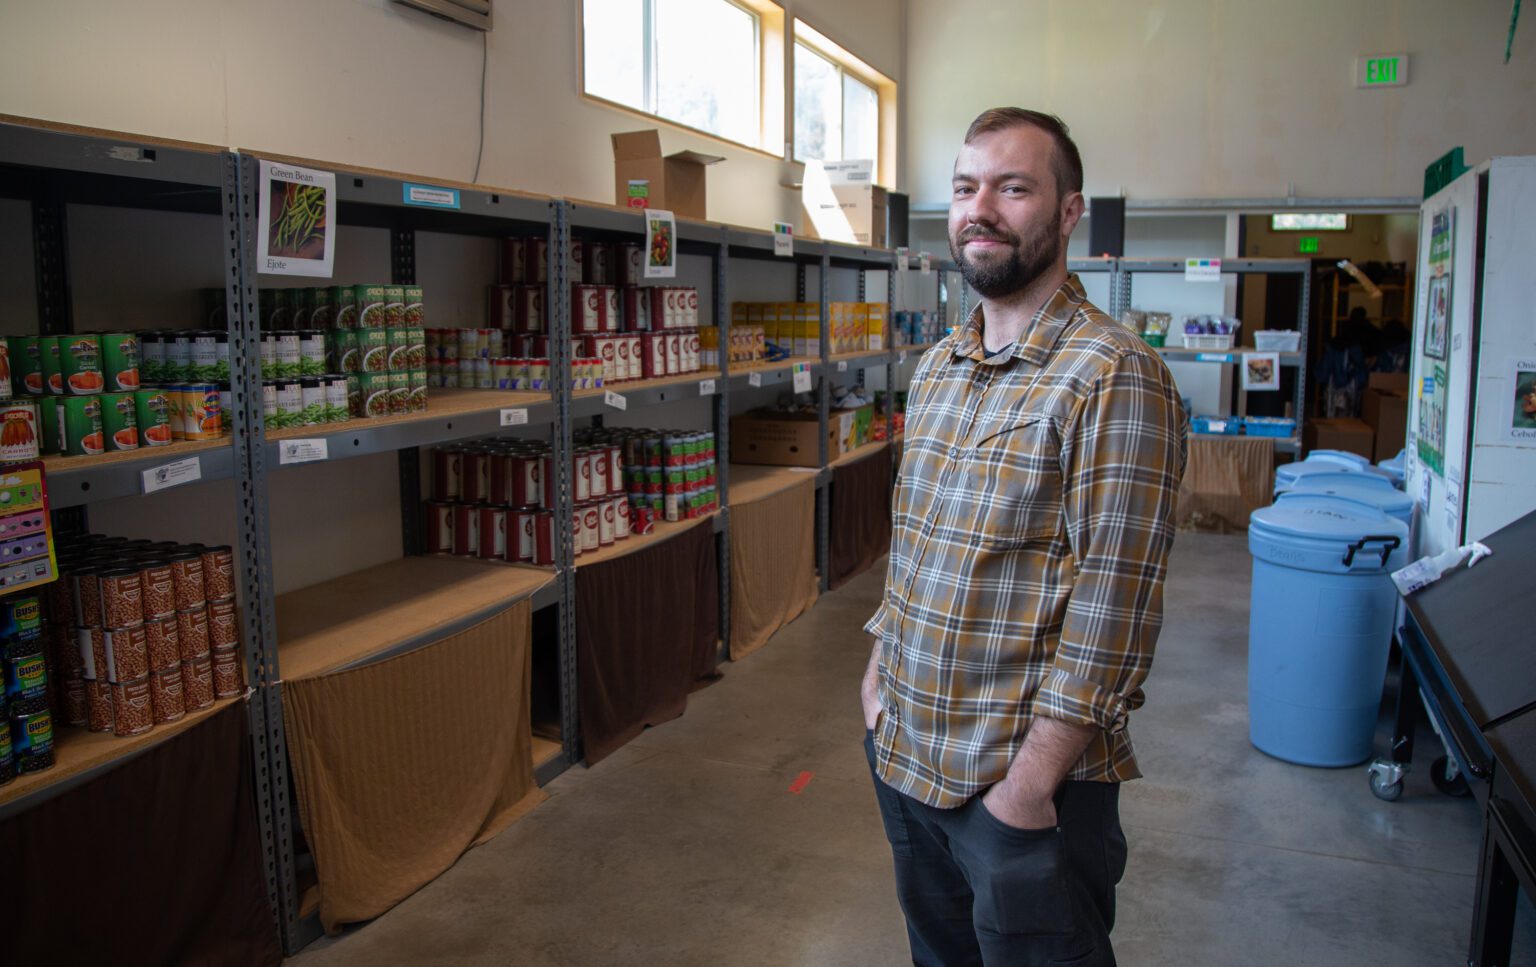 Sam Norris, the executive director of Foothills Food Bank. Norris, stands next to shelves of canned food.